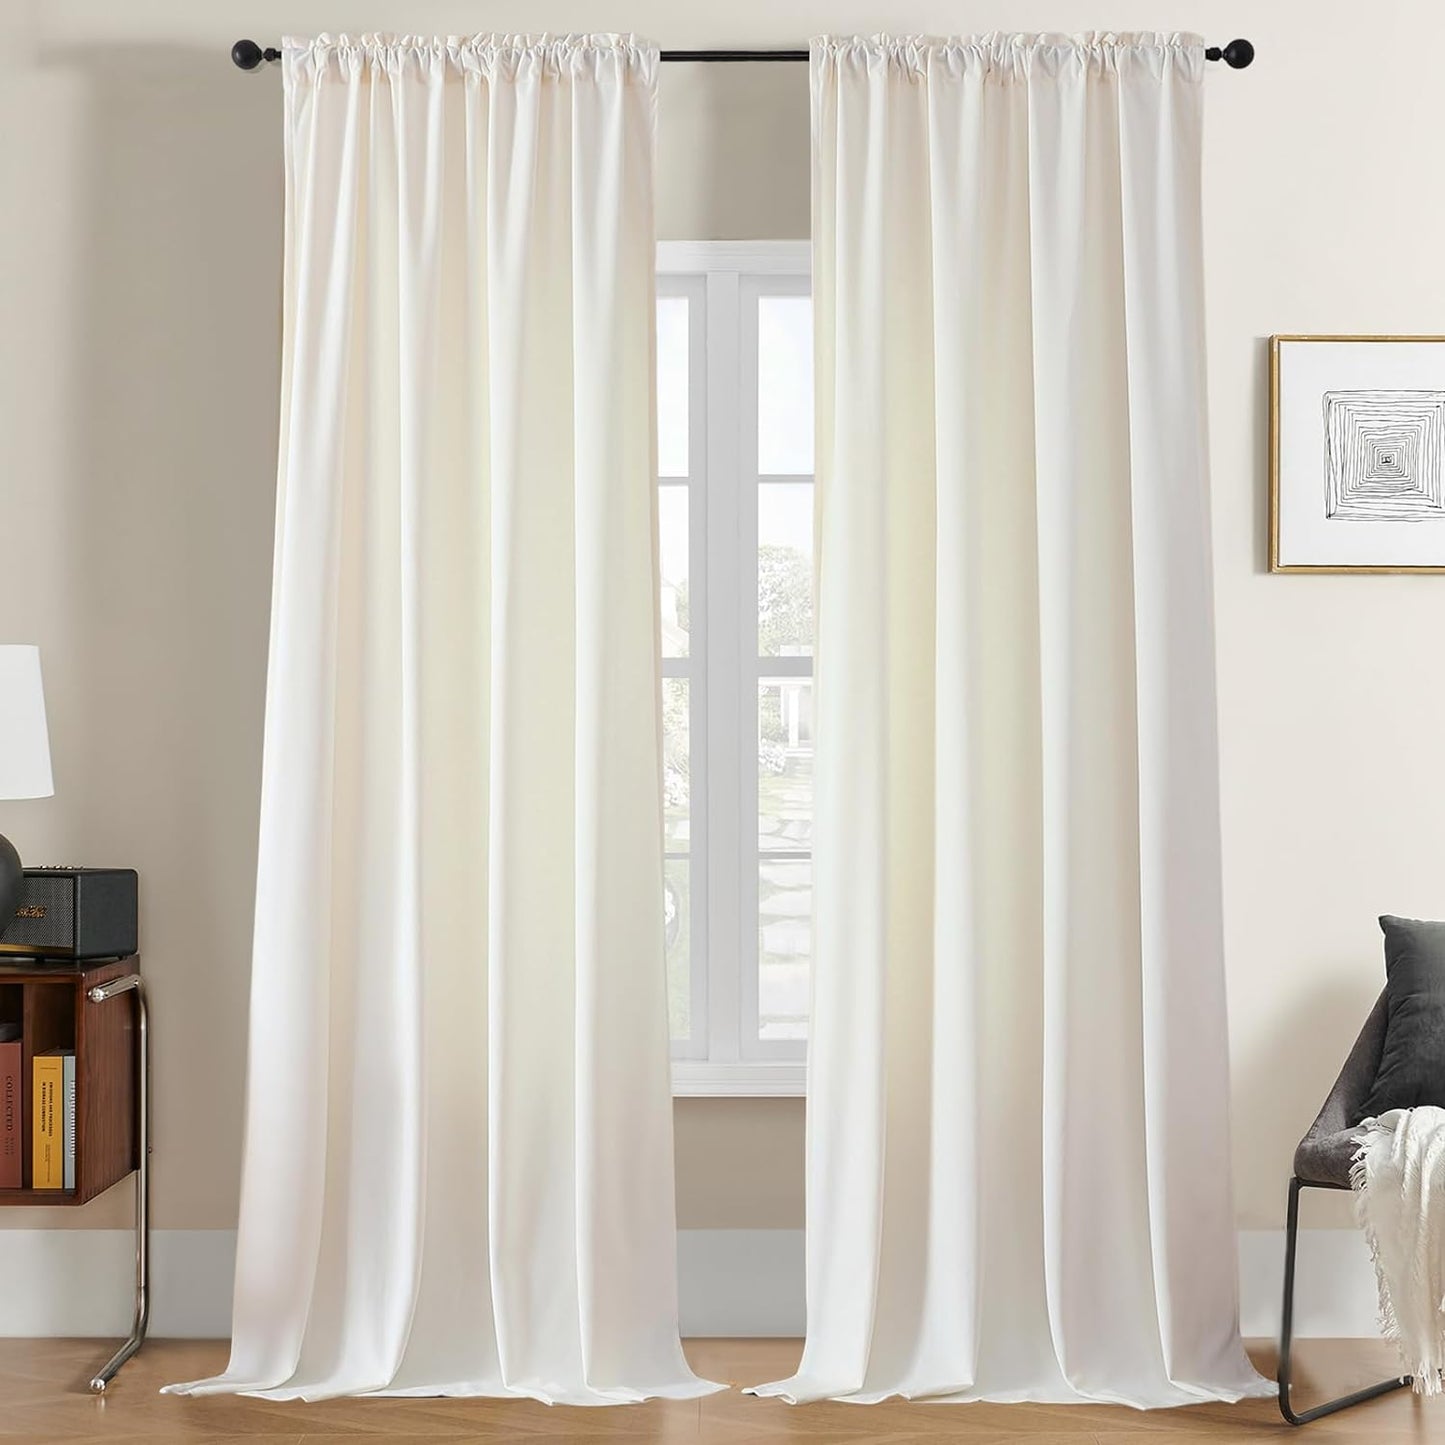 Joydeco Black Velvet Curtains 90 Inch Length 2 Panels, Luxury Blackout Rod Pocket Thermal Insulated Window Curtains, Super Soft Room Darkening Drapes for Living Dining Room Bedroom,W52 X L90 Inches  Joydeco Rod Pocket | Ivory White 52W X 84L Inch X 2 Panels 